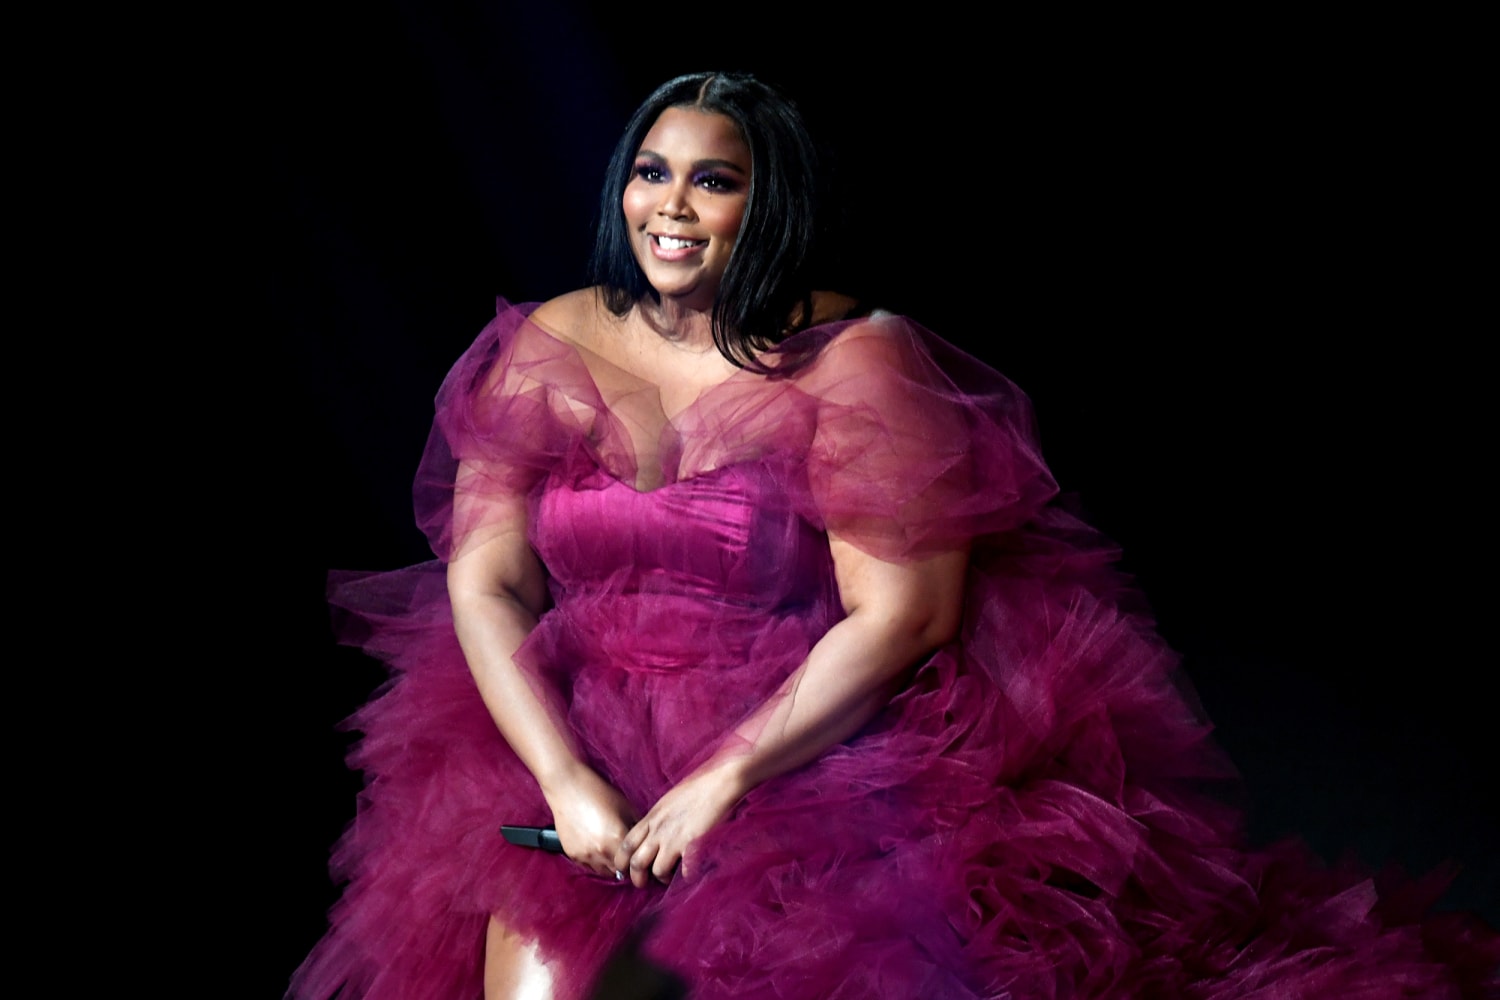 A Lizzo fan made a TikTok video asking to borrow a dress for a red carpet  event. The plea worked.